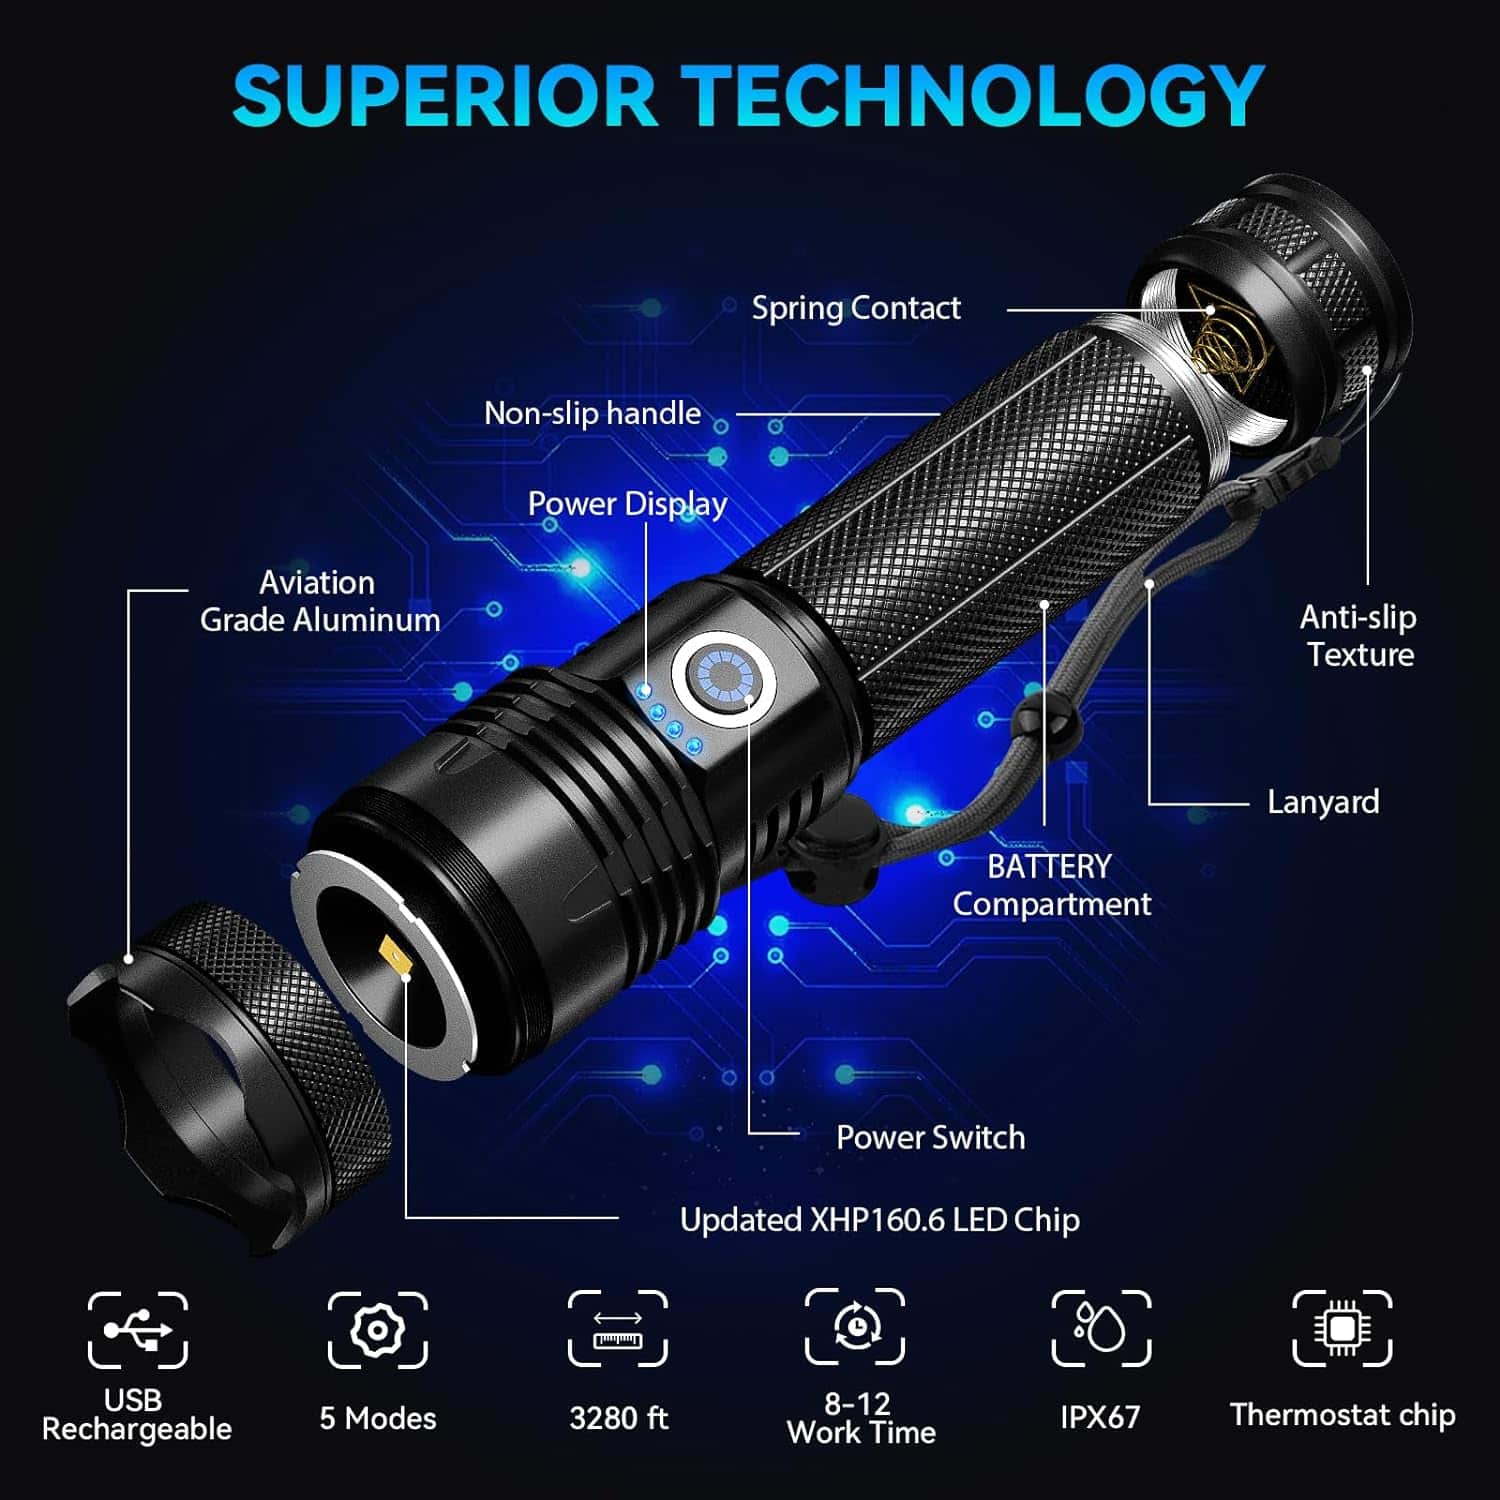 NiaoChao Rechargeable Flashlights High Lumens, 900000 Lumens Super Bright LED Flash Light with 5 Modes, IPX6 Waterproof Flashlight with Large Capacity, Bright Flashlights for Home Camping